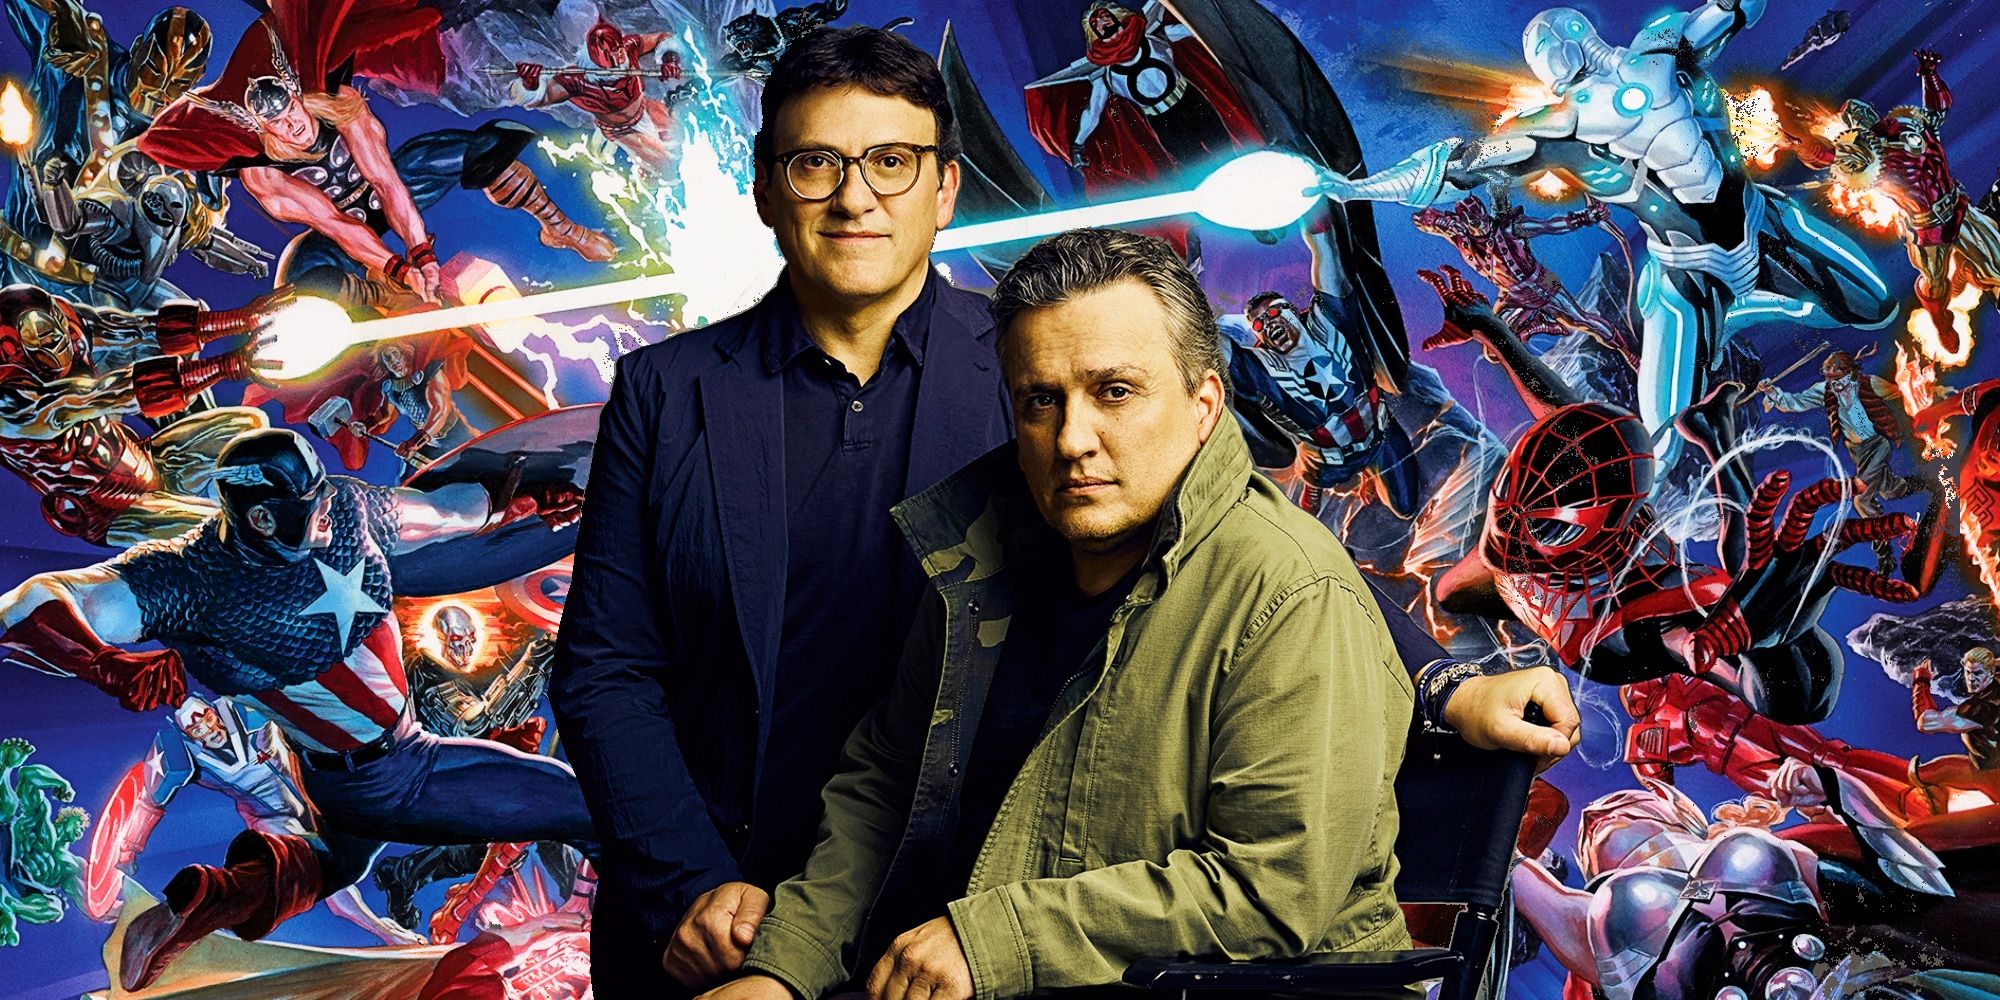 Avengers: Secret Wars, Kang Dynasty won't bring back the Russo brothers -  Polygon